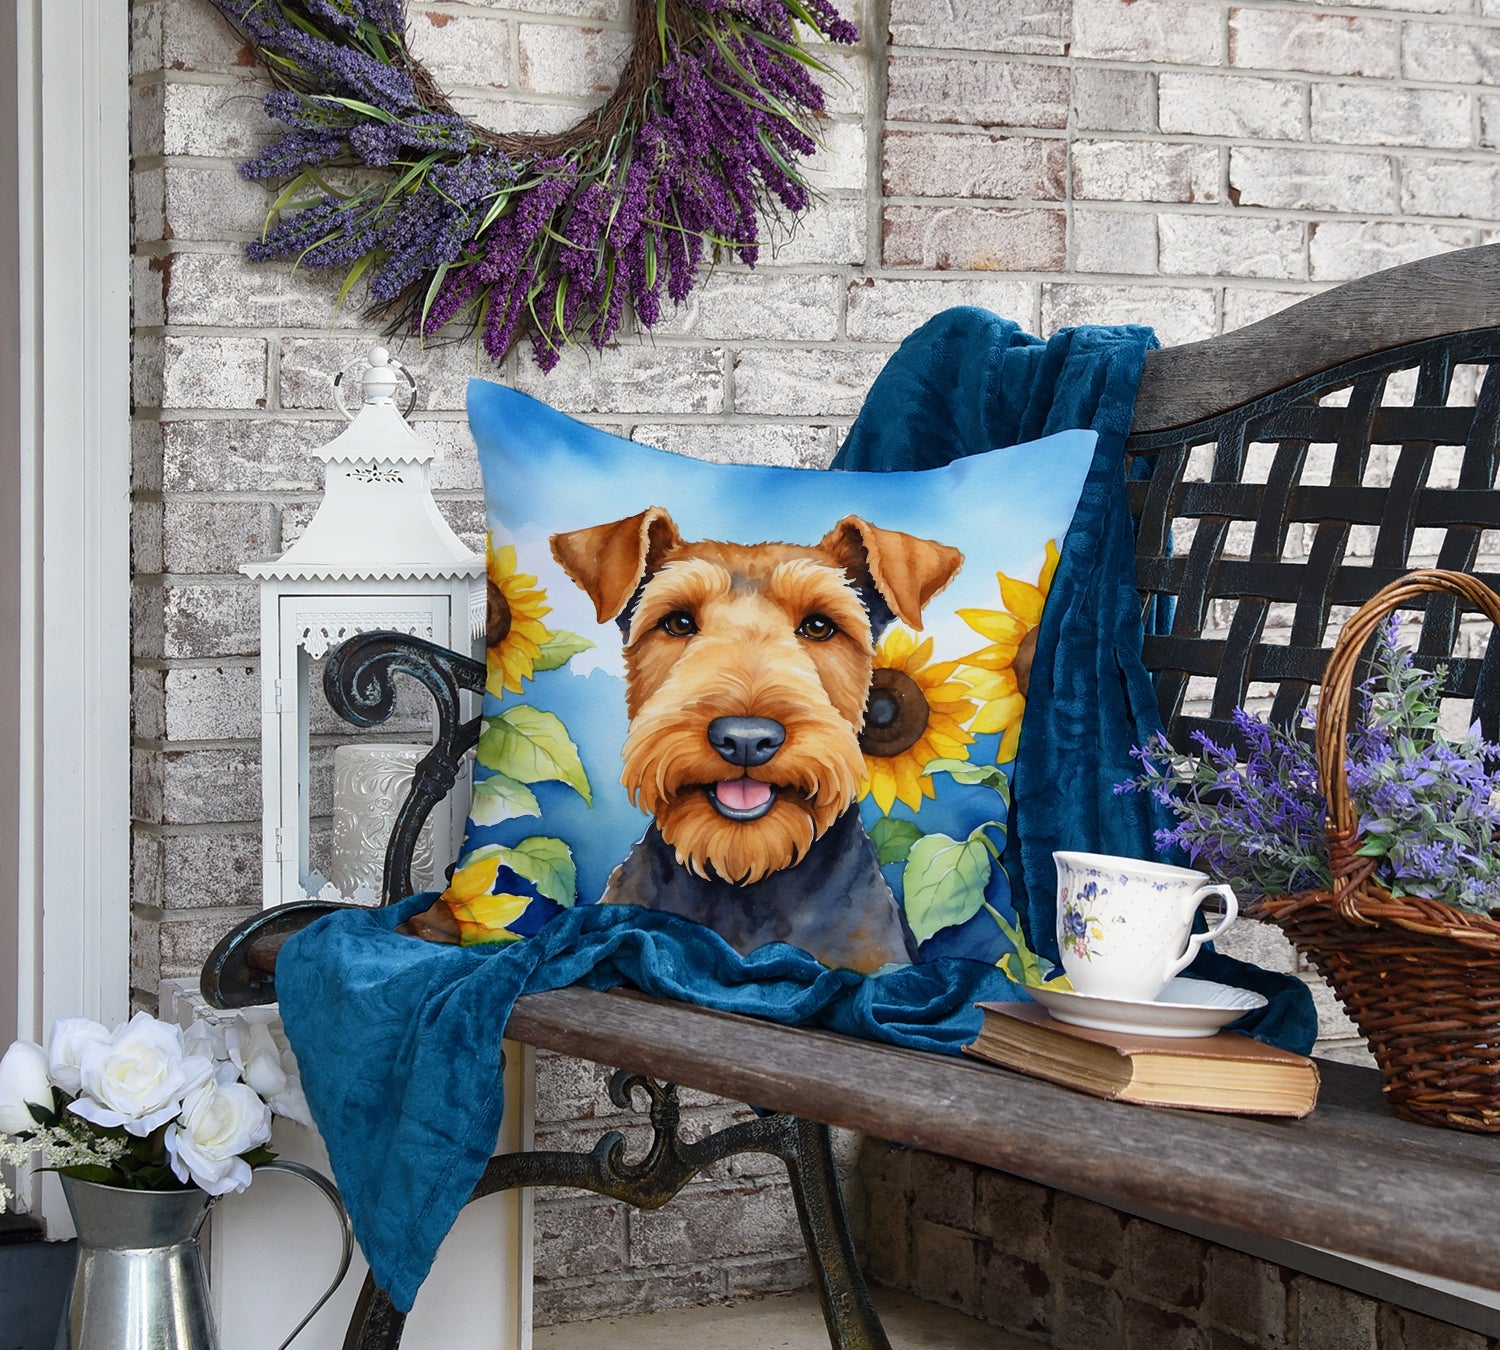 Airedale Terrier in Sunflowers Throw Pillow